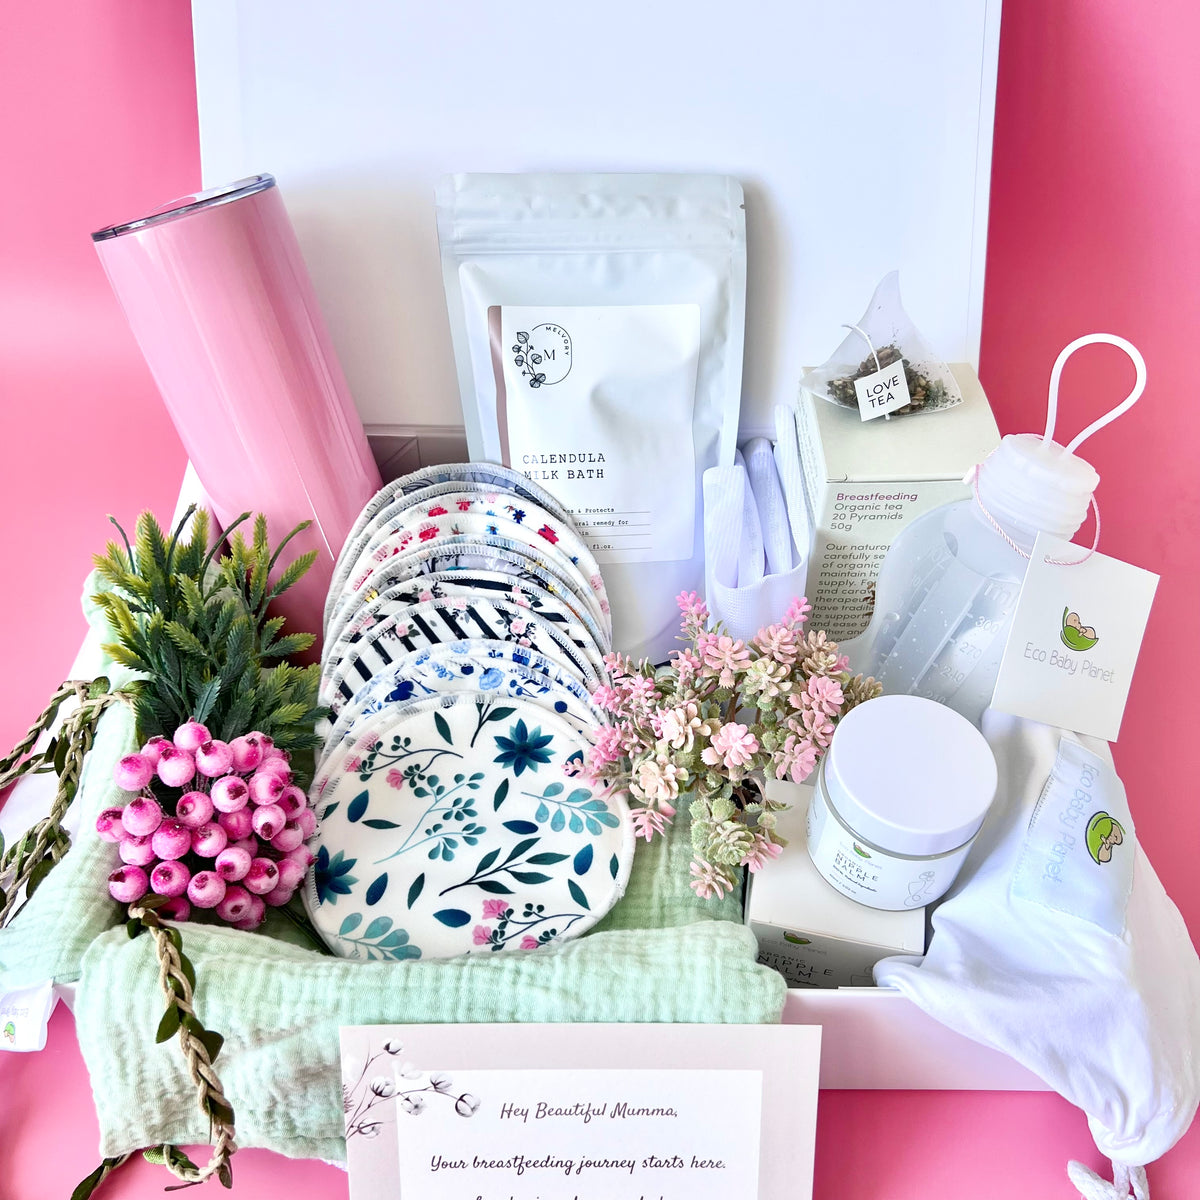 breastfeeding gift box for new mums and mum to be in australia